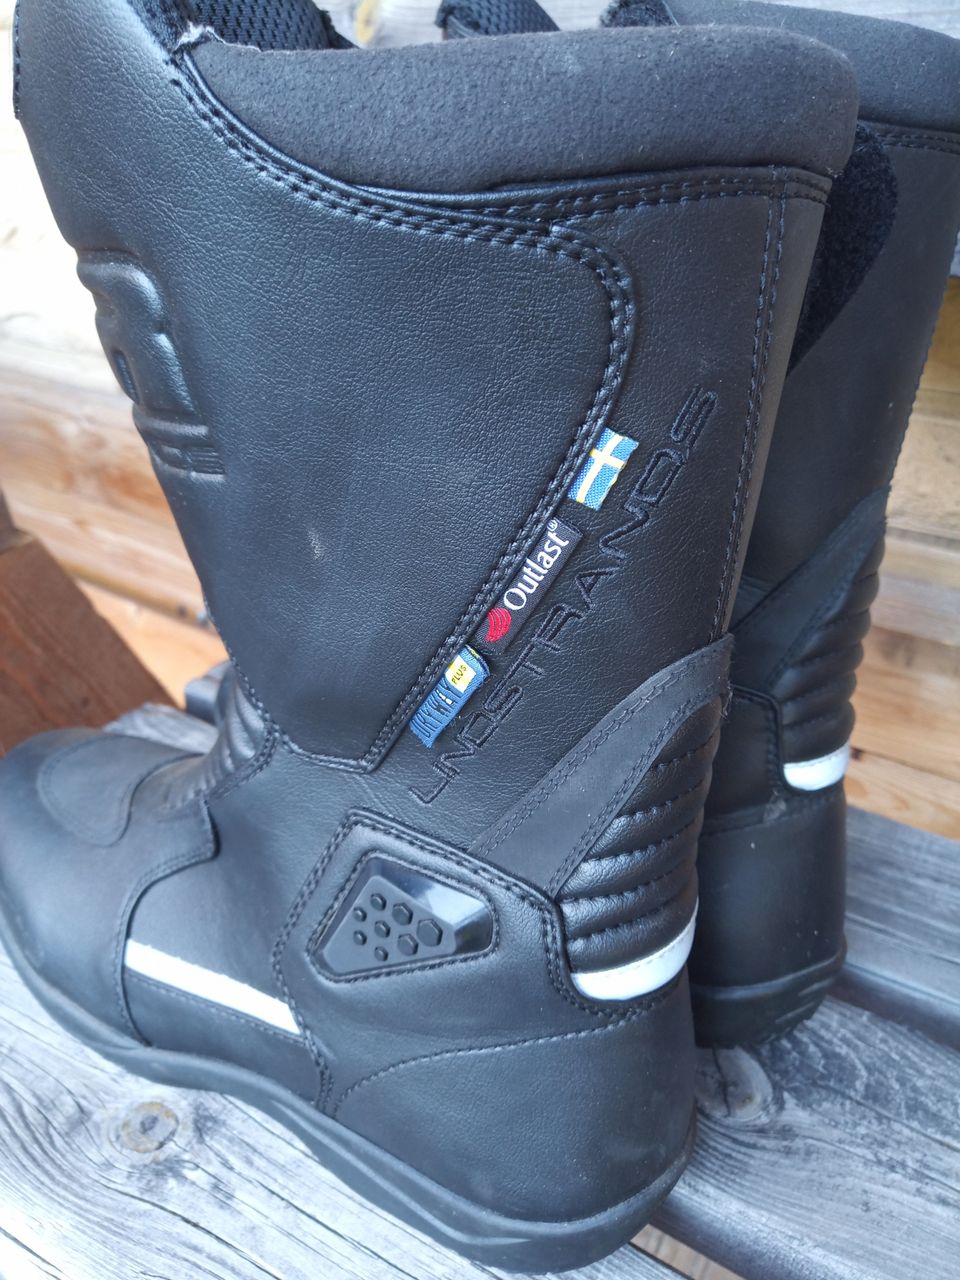 Lindstrands Motorcycle boots